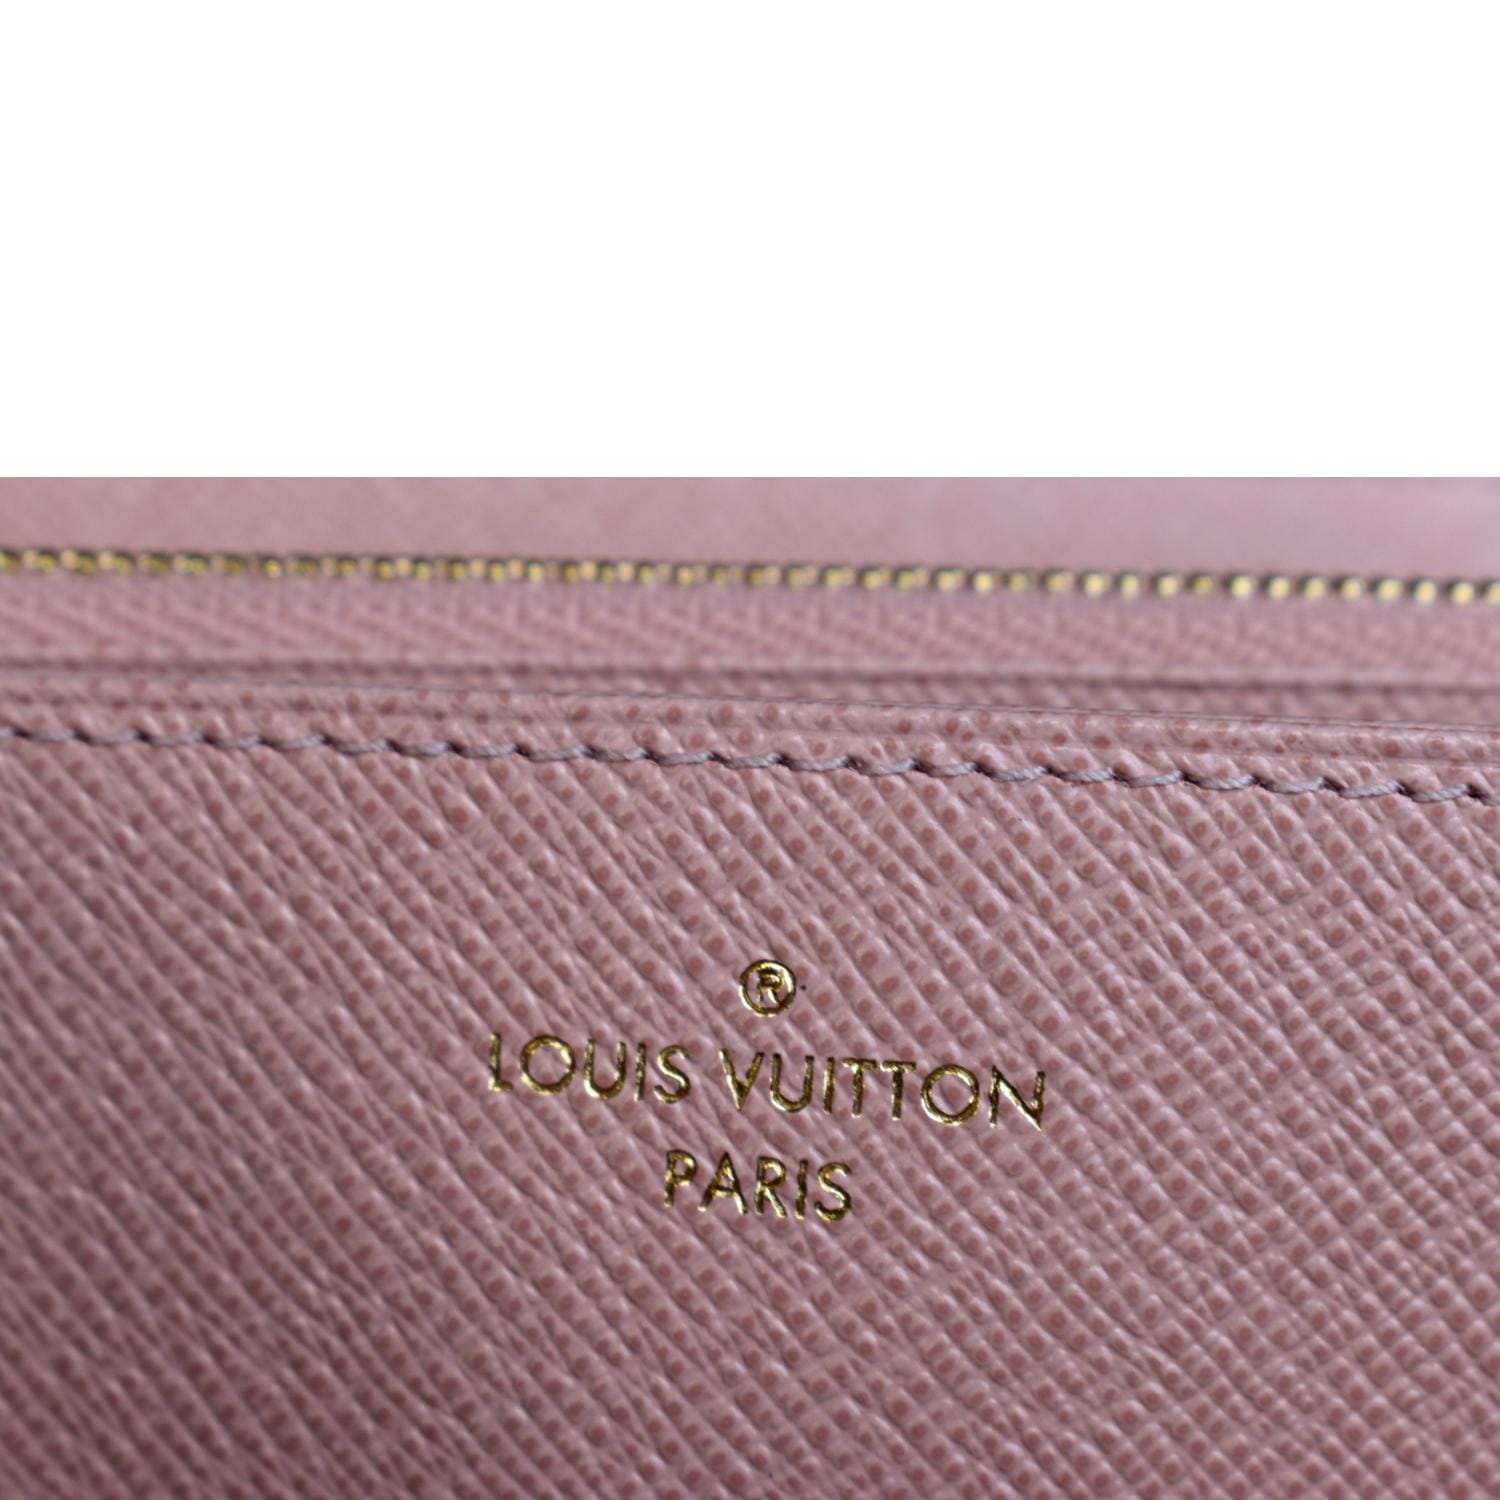 Zippy Wallet Monogram Canvas - Wallets and Small Leather Goods